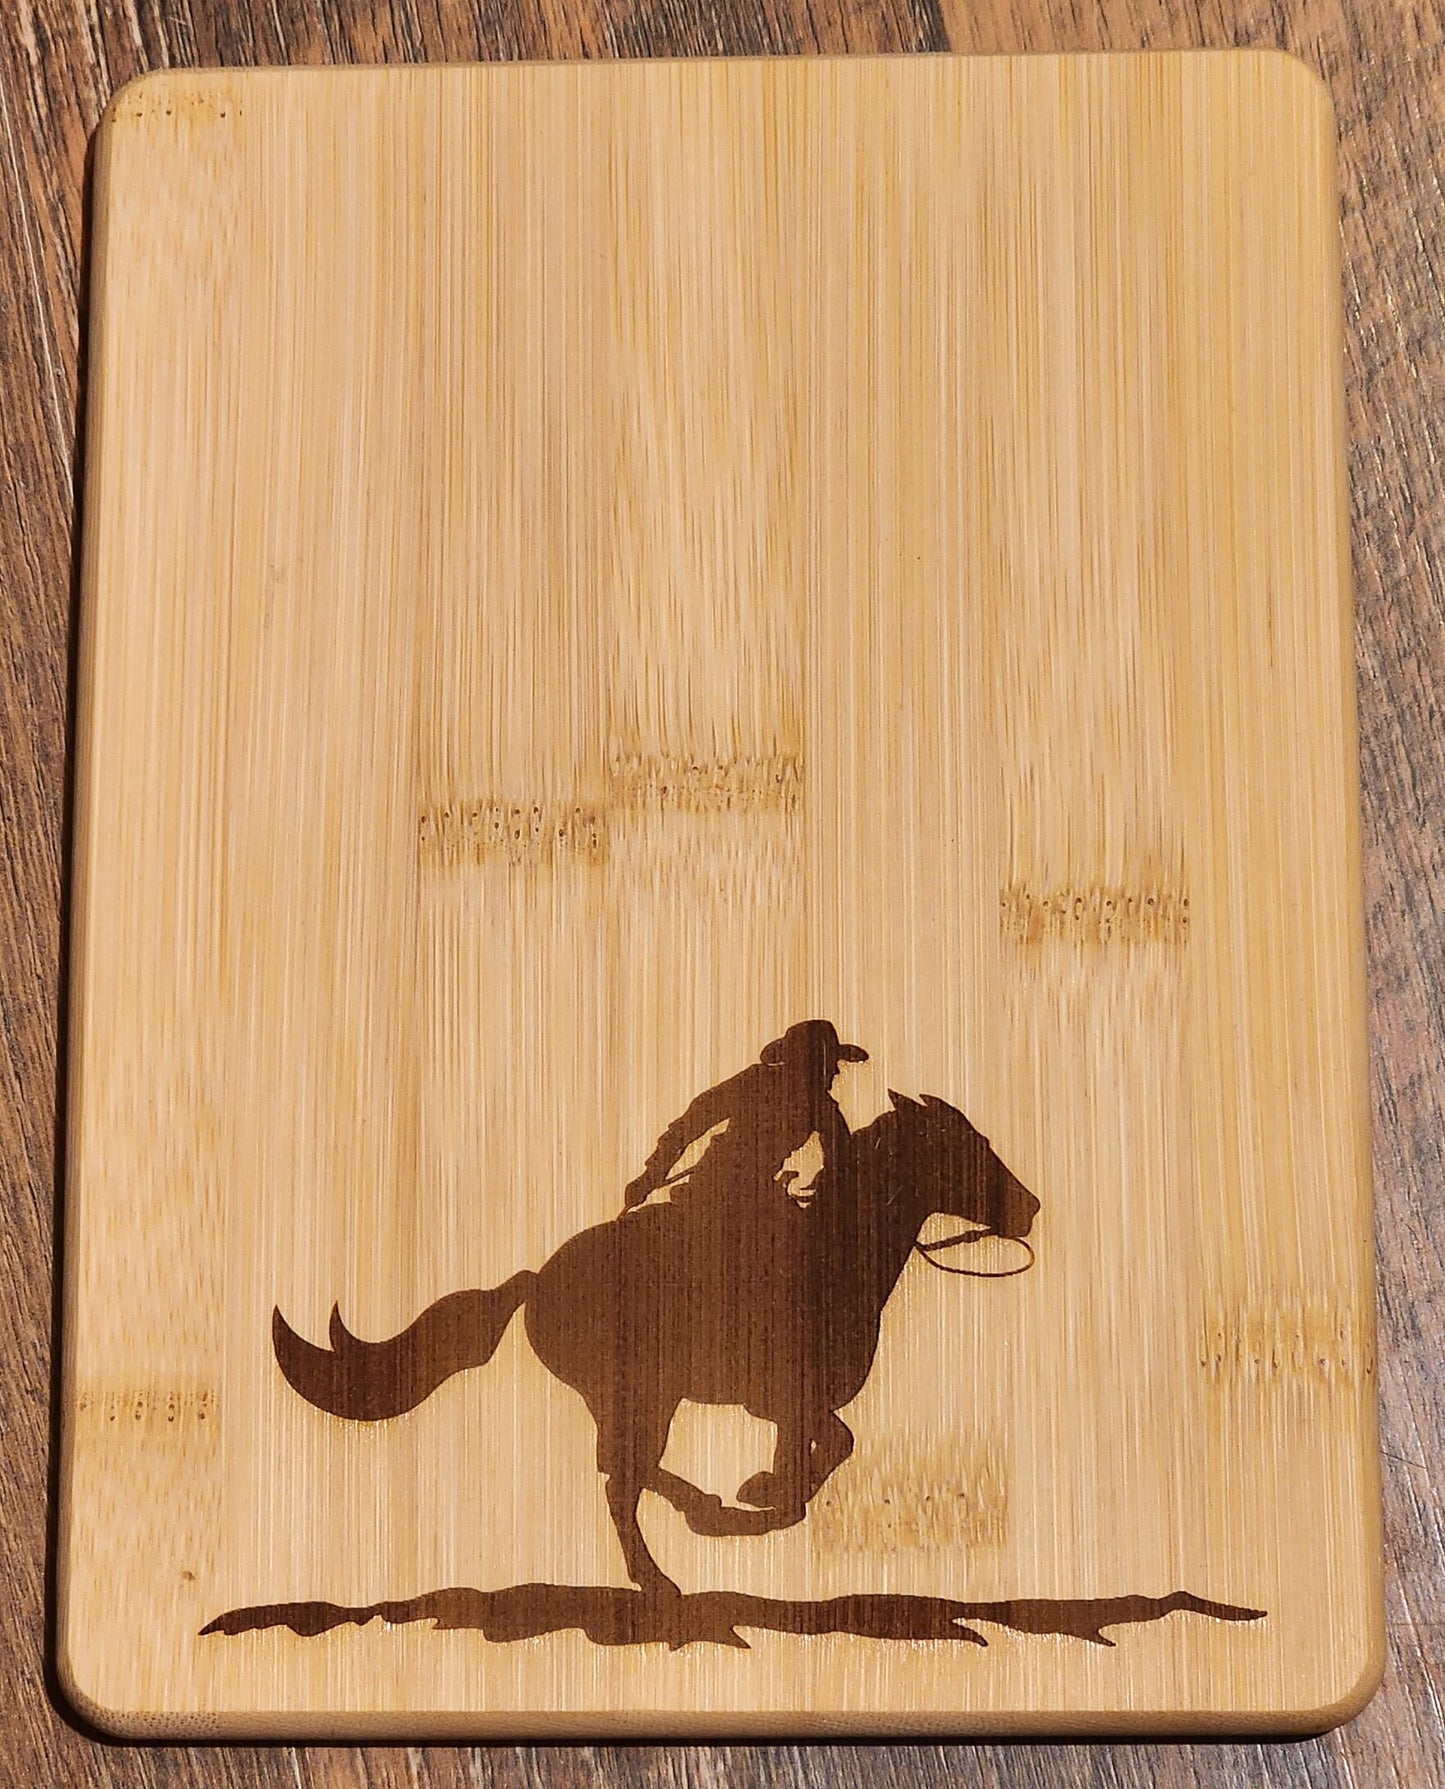 Running Cowboy and horse, western, country etched Bamboo Wood Cutting Board  - 8.75 x 6.875 inches